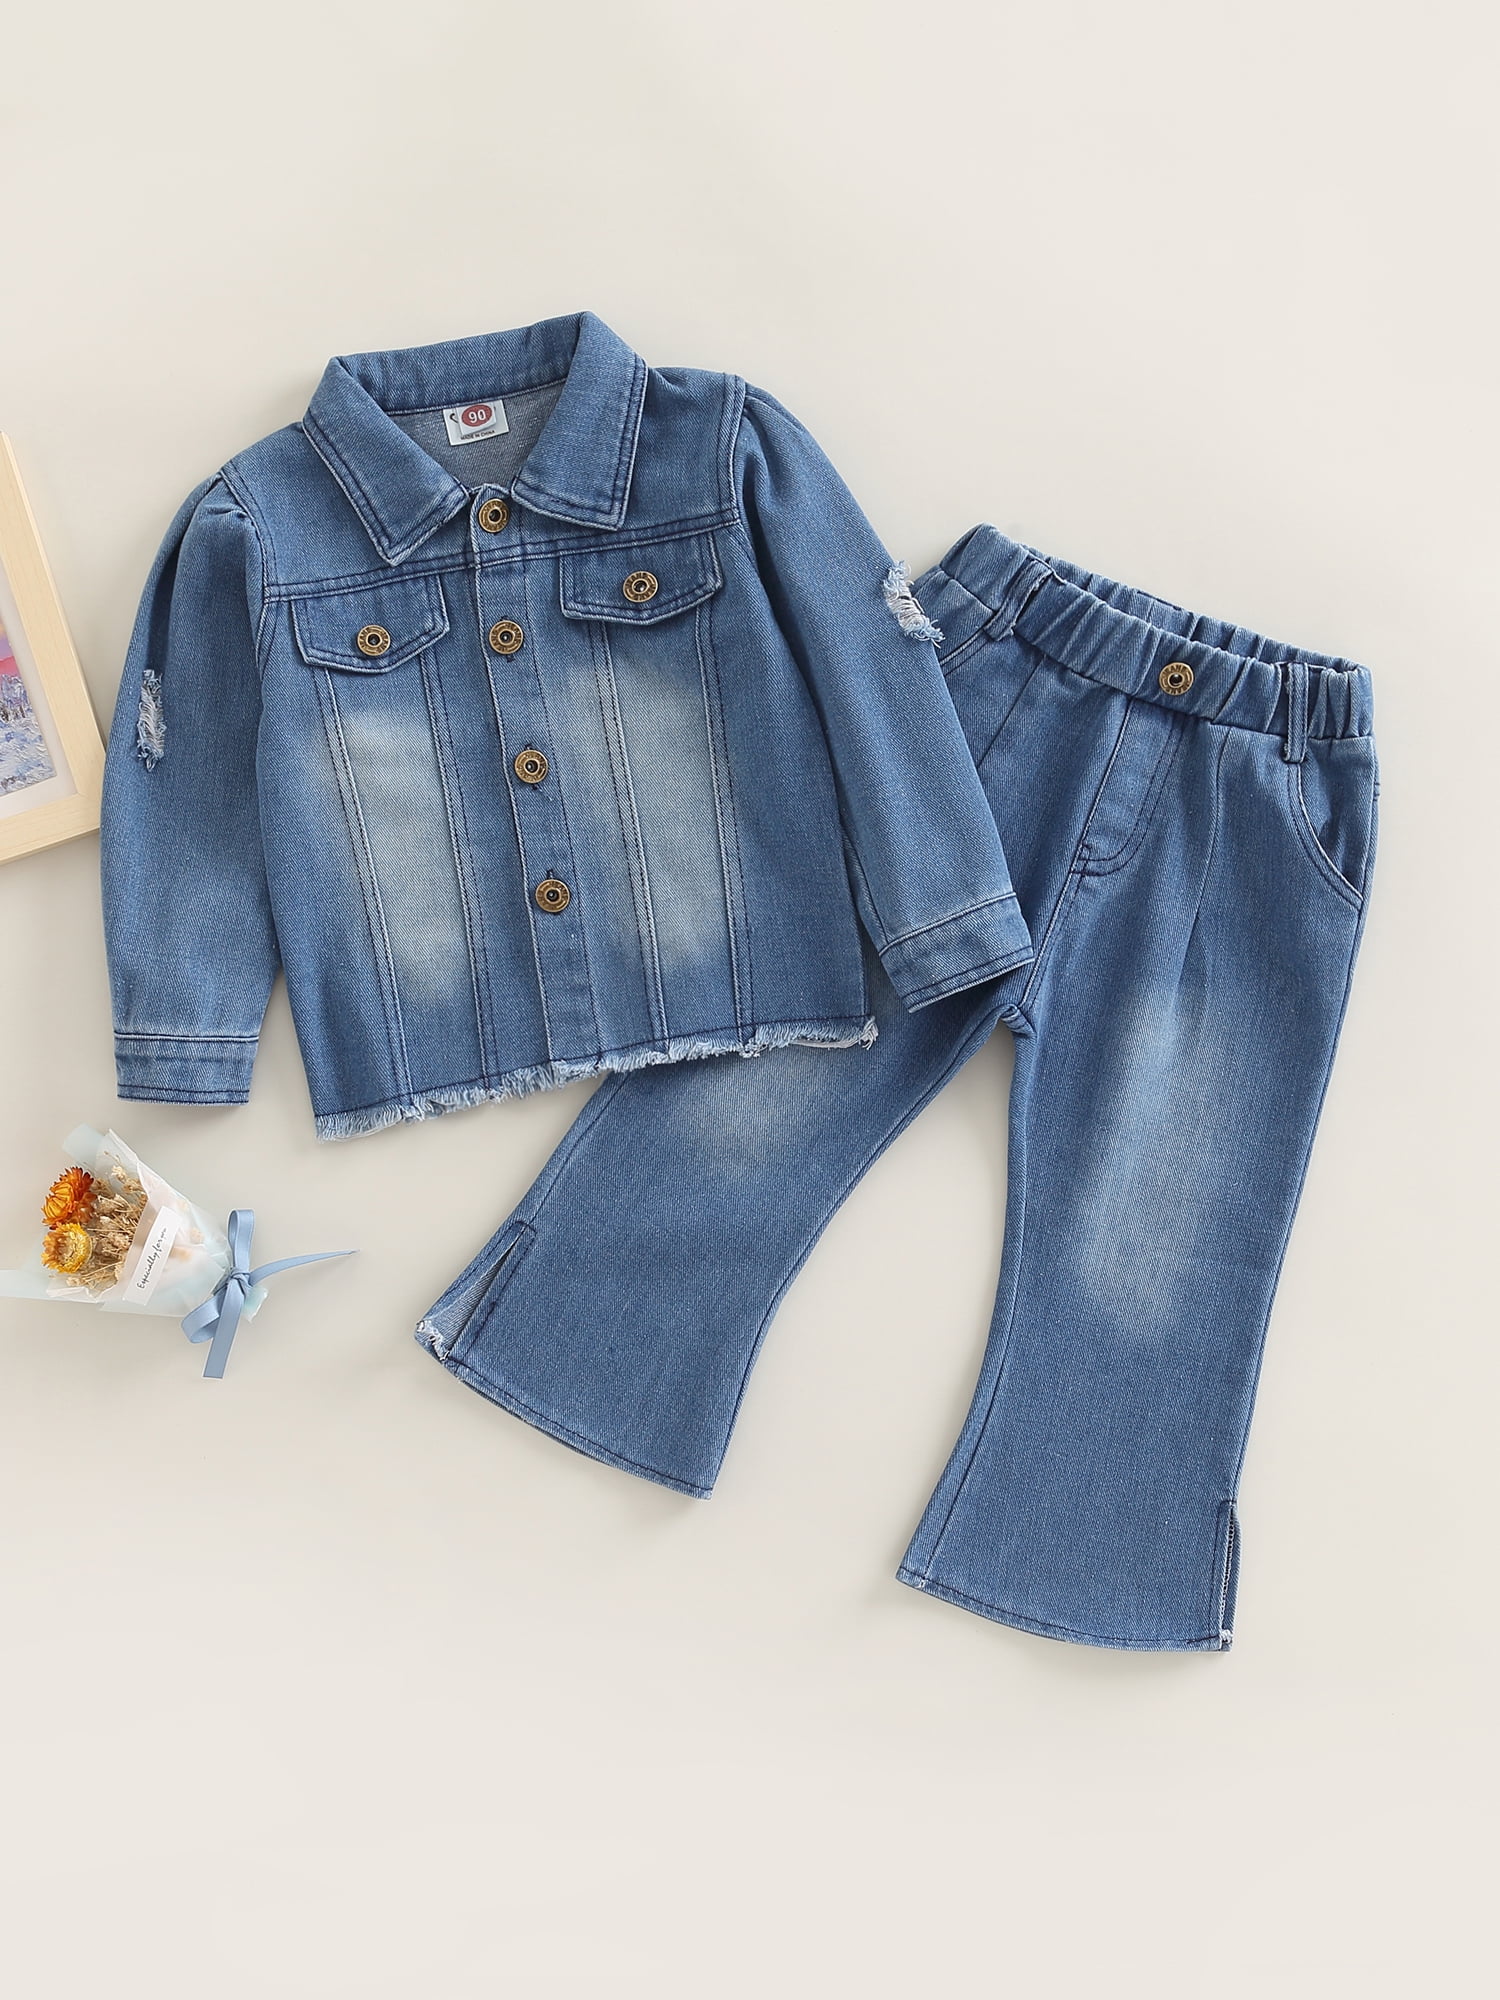 Spring Autumn Children Denim Dress for Girls Clothes Long Sleeve Pearls Jean  Dress Baby Kids Button Clothing 5 6 8 9 10 12 Years - AliExpress